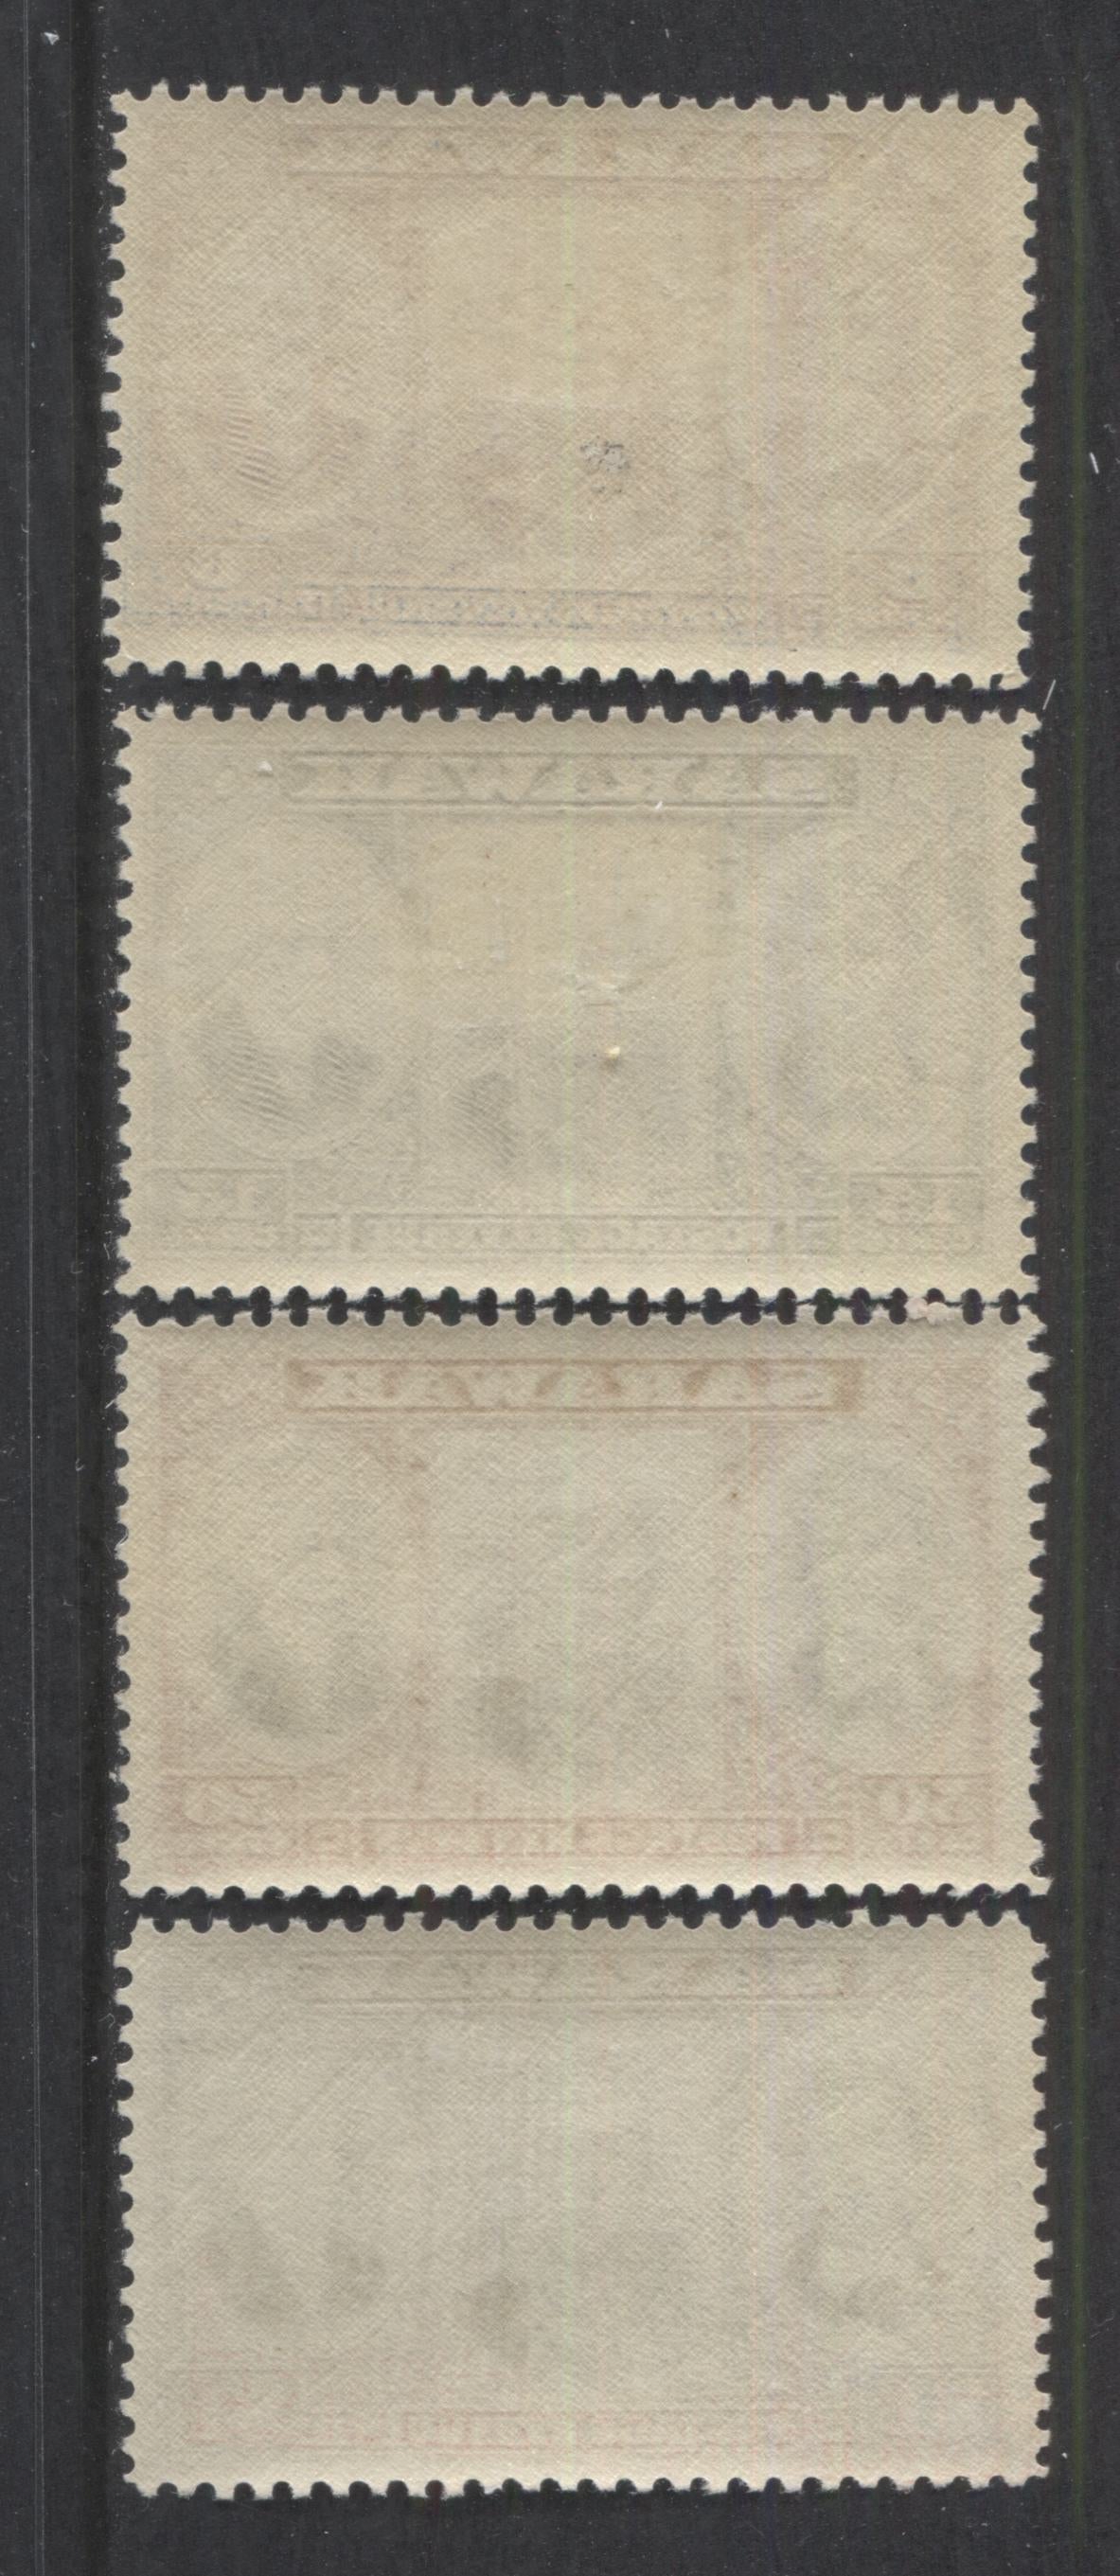 Lot 9 Sarawak SG#146-149 1946 Centenary Issue, A Complete VFNH Set, Perf 12, Unwatermarked. SG. Cat. 19.75 GBP = $33.97